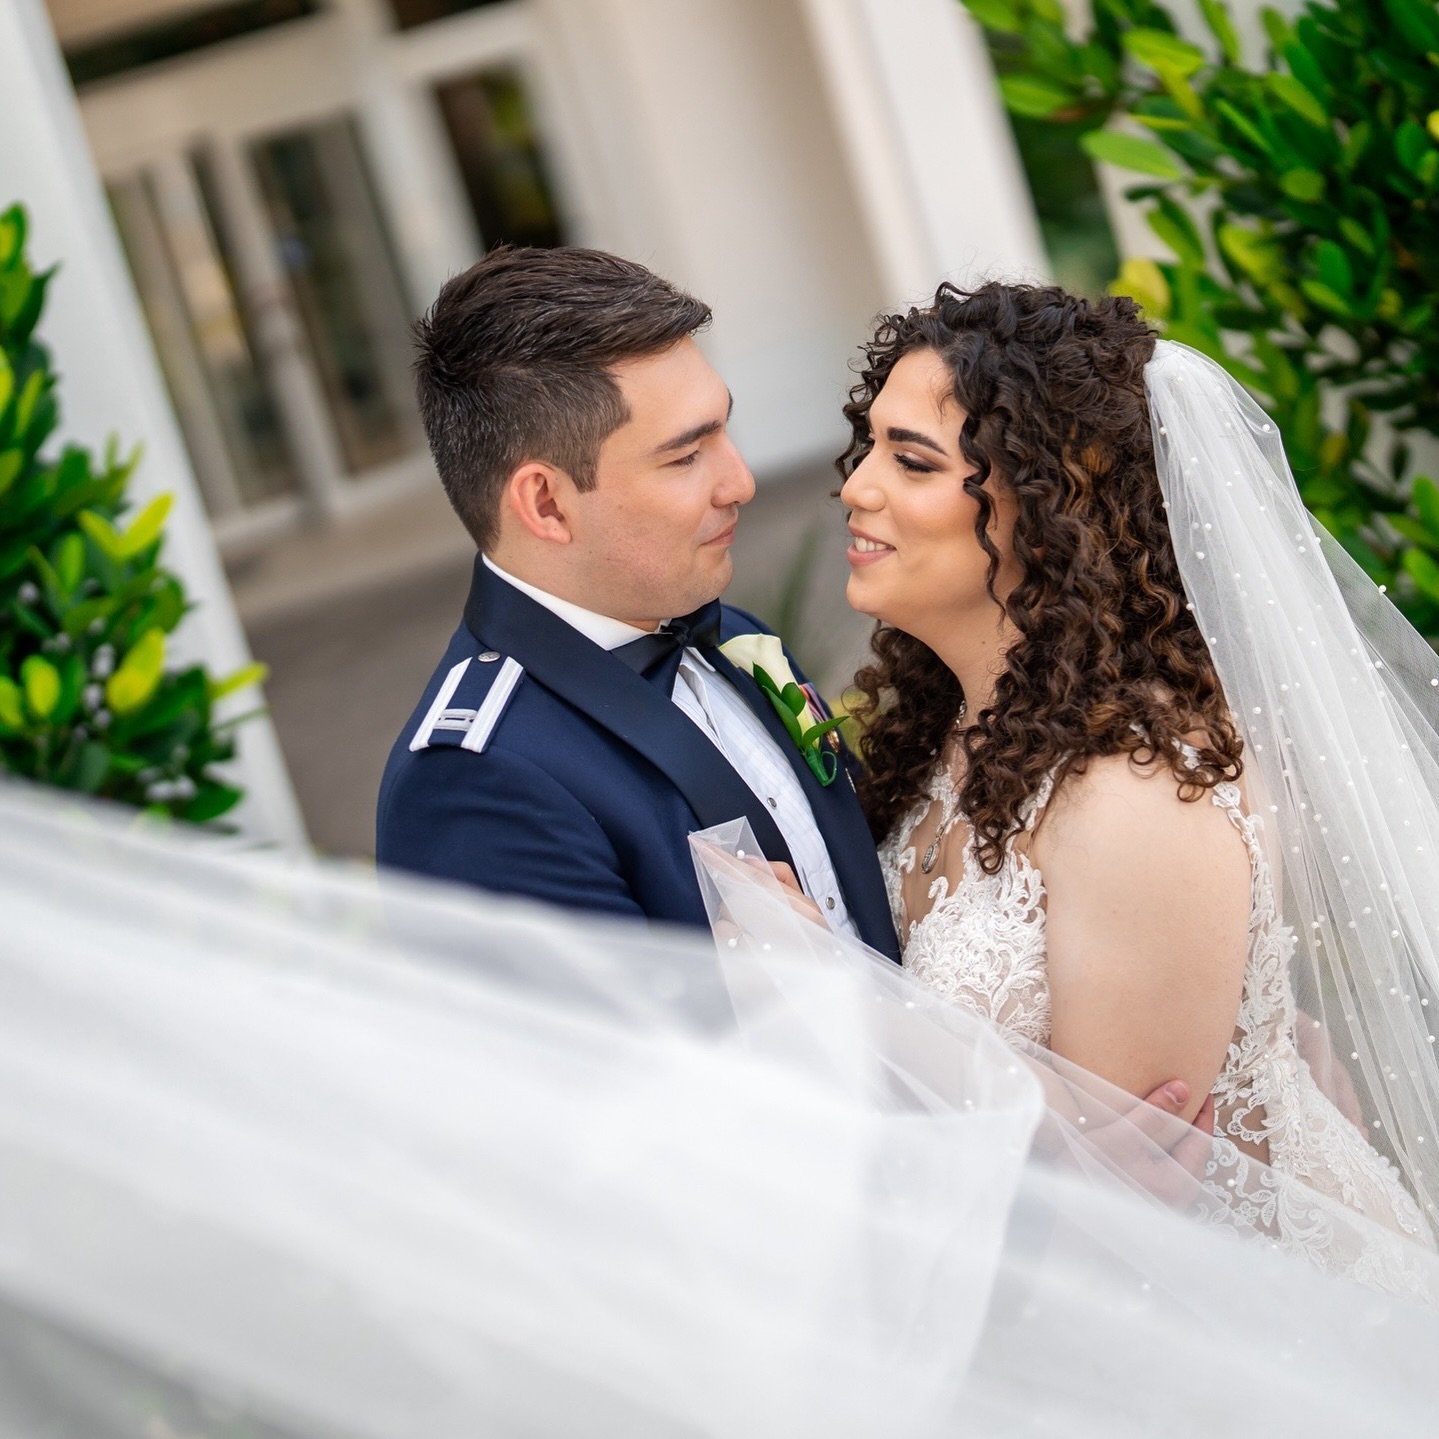 Taking My Breath Away 🥰
.
.
Events with a Promise 
South Fl Certified | Boutique Wedding Planning &amp; Design specializes in Destinations and Honeymoons
💁🏻&zwj;♀️ Your Planner Monica Reyes 
💻 Eventswithapromise.com
📧 Monica@eventswithapromise.c